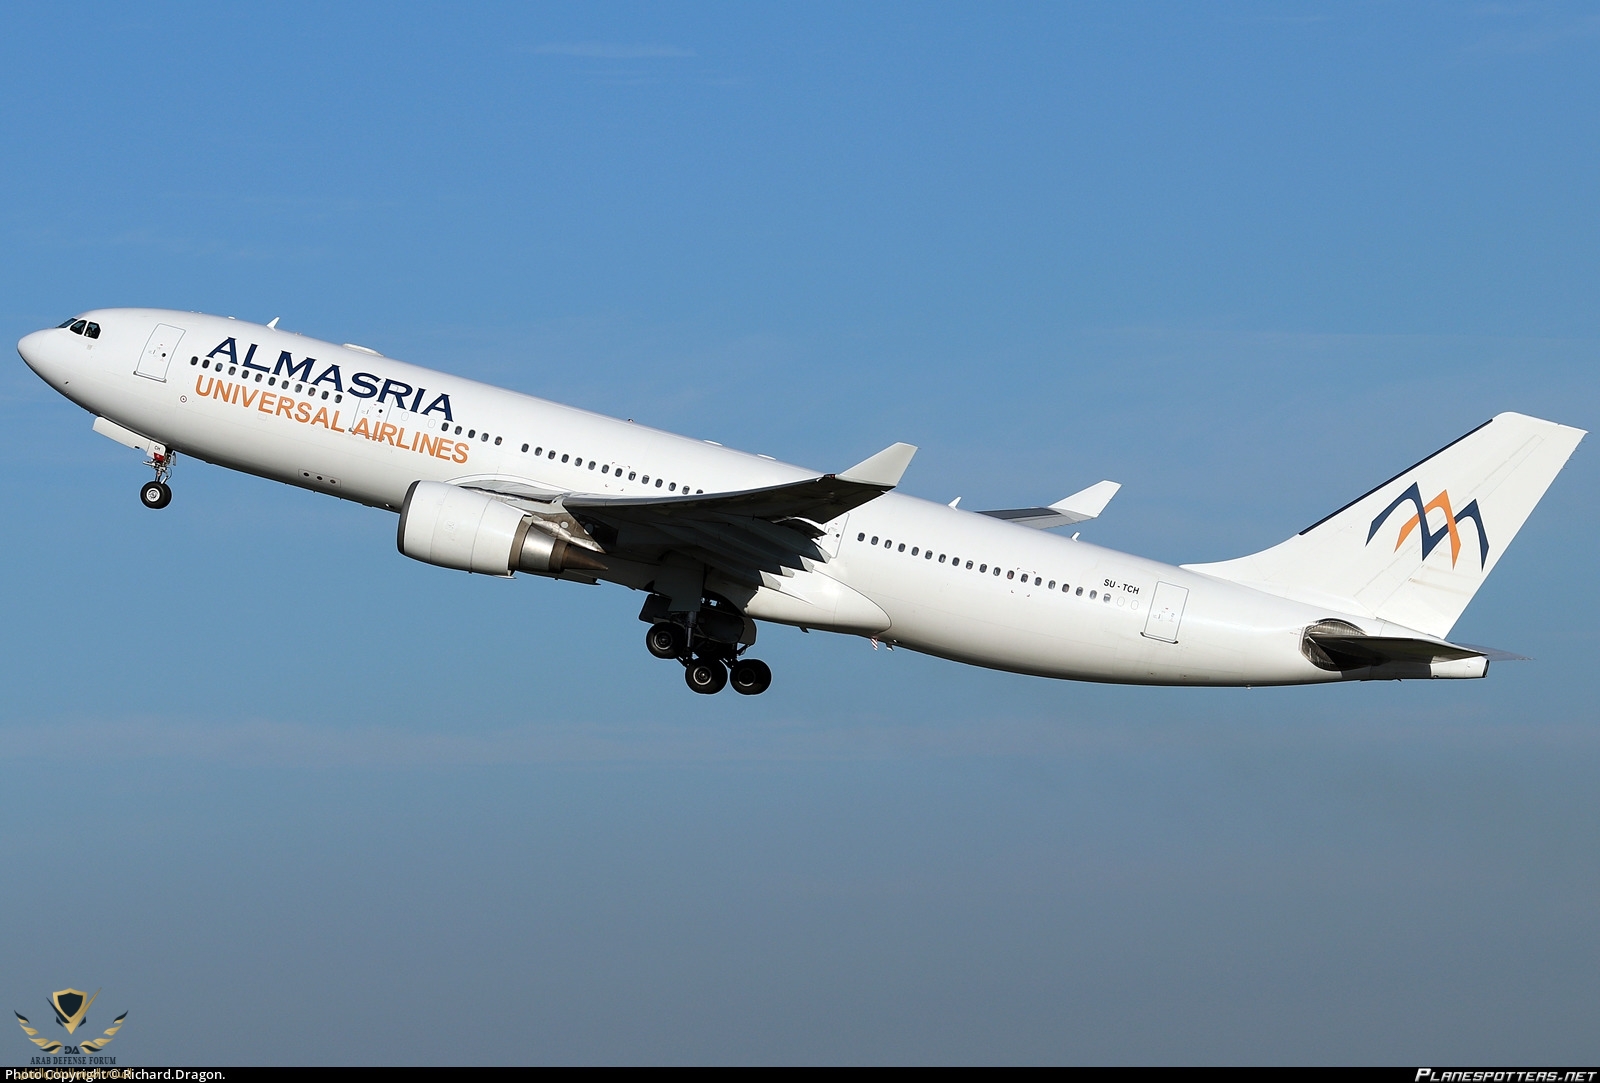 su-tch-almasria-universal-airlines-airbus-a330-203_PlanespottersNet_887667_0bd4aba488_o.jpg